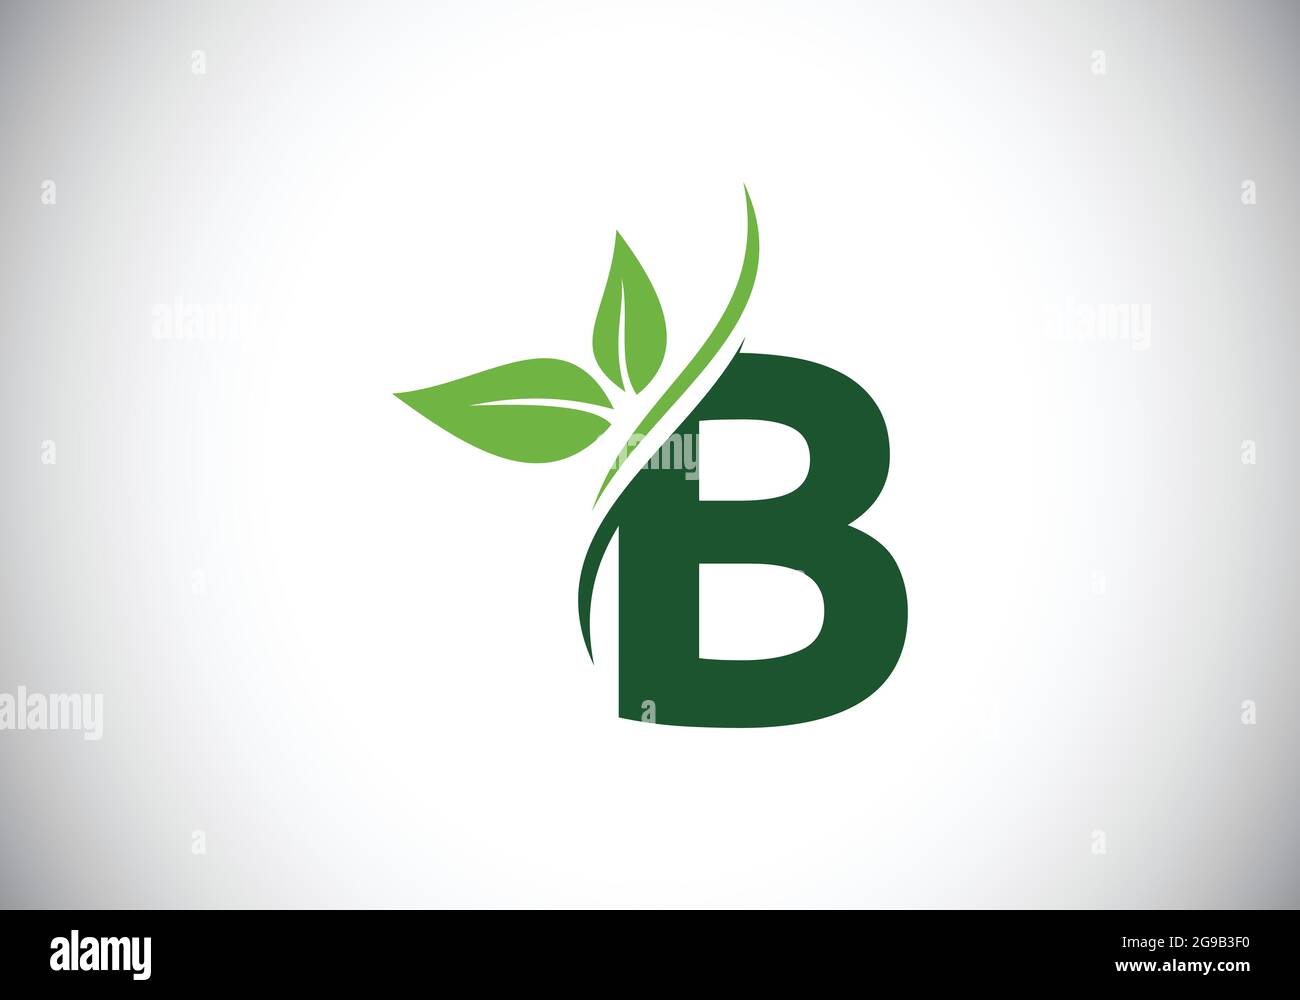 https://c8.alamy.com/comp/2G9B3F0/initial-b-monogram-alphabet-with-two-leaves-green-eco-friendly-logo-concept-modern-vector-logo-for-ecological-business-and-company-identity-2G9B3F0.jpg